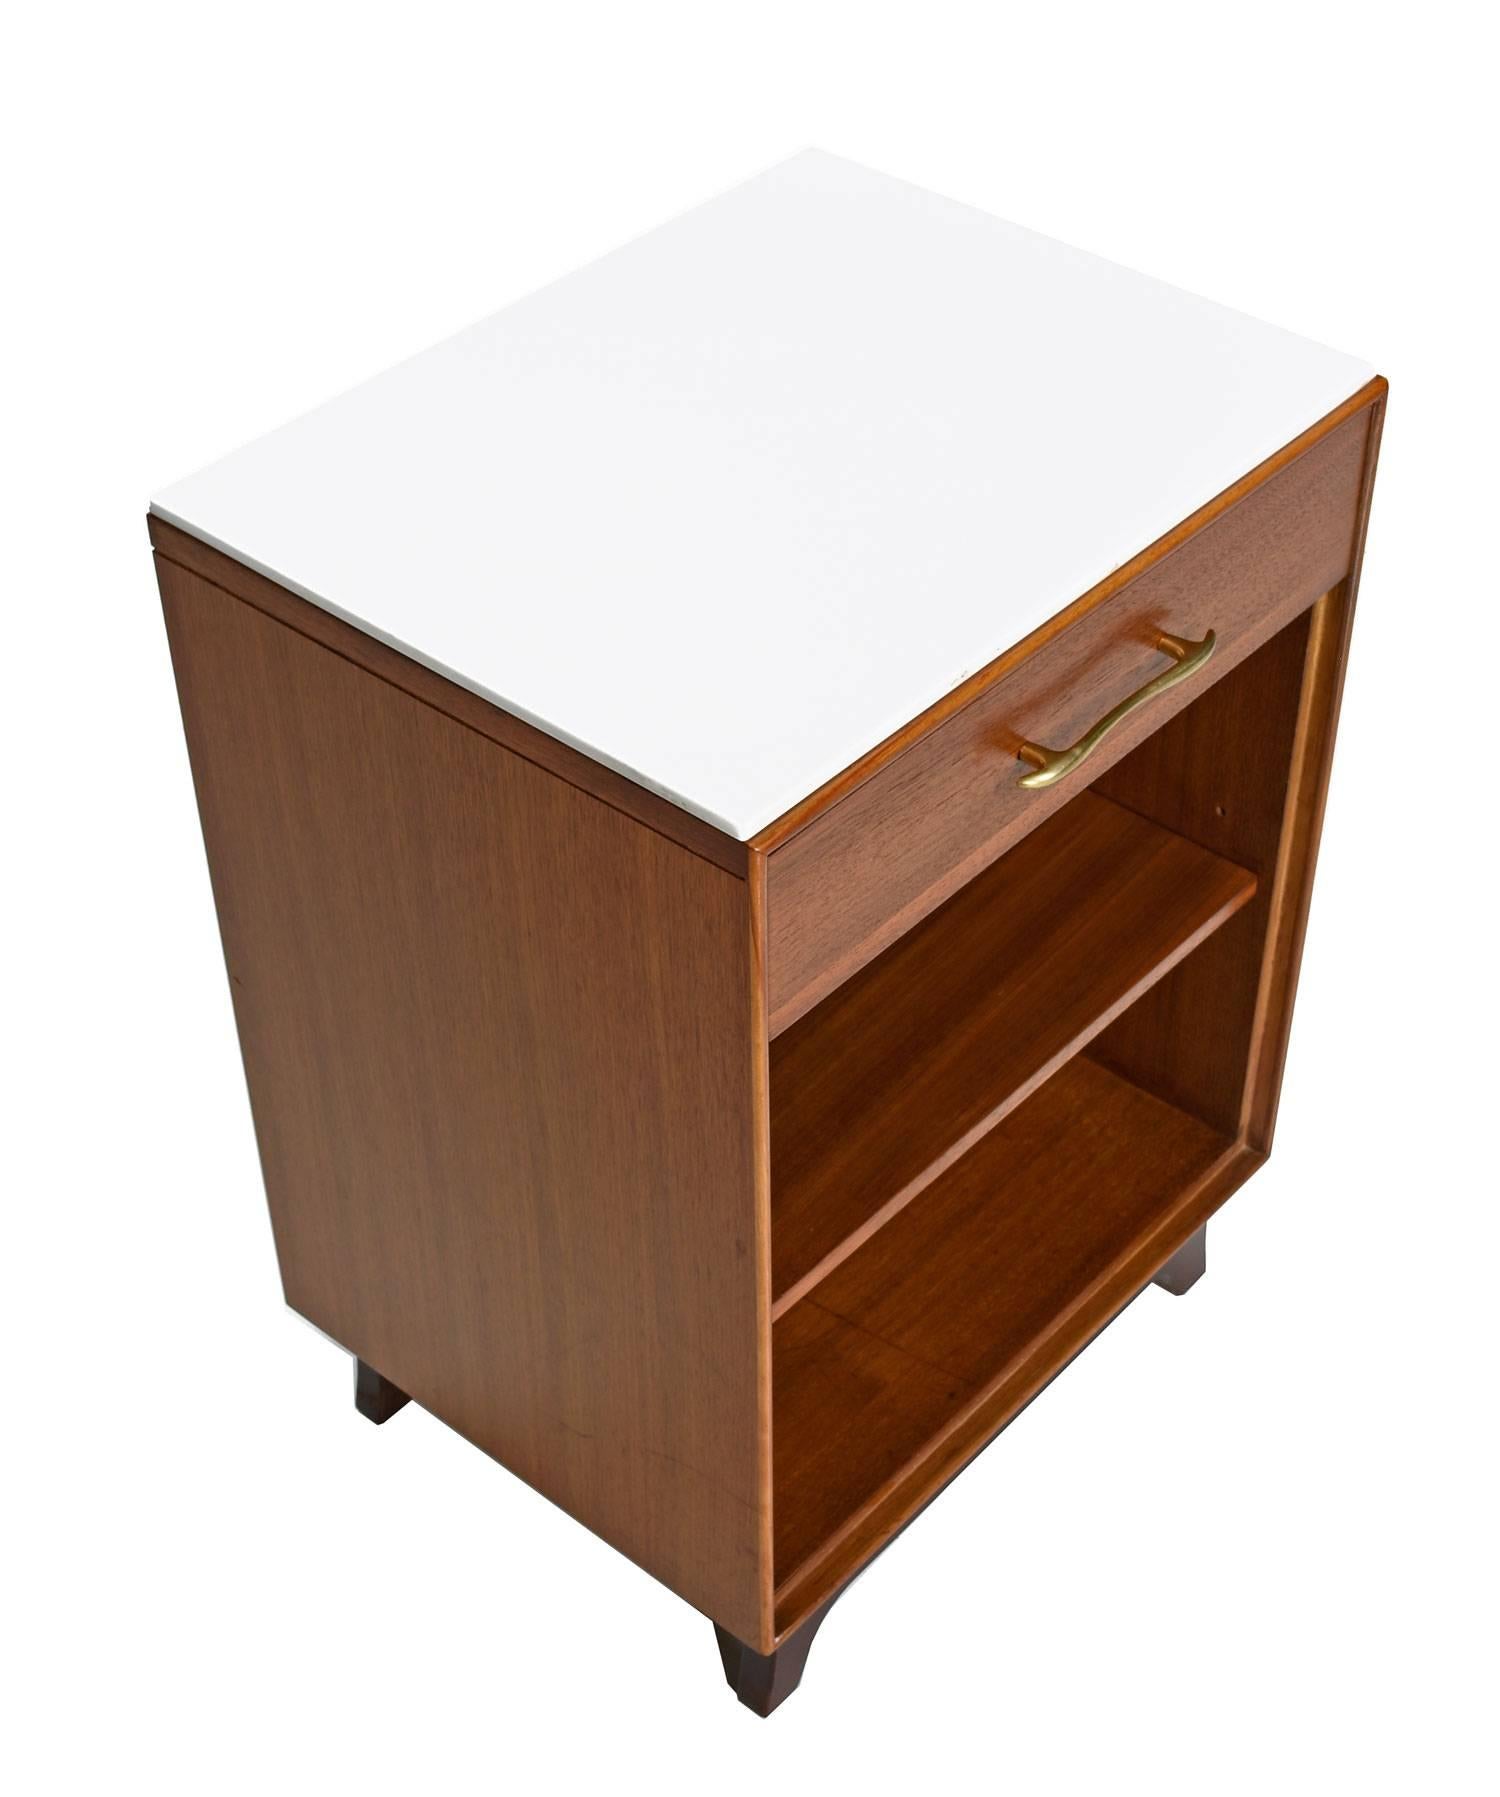 This Mid-Century Modern pair of nightstands by RWAY features expert craftsmanship and spectacular walnut wood. The nightstands comes with a piece of polished white stone to accent and protect the top surface. Place perfume bottles, drinks and